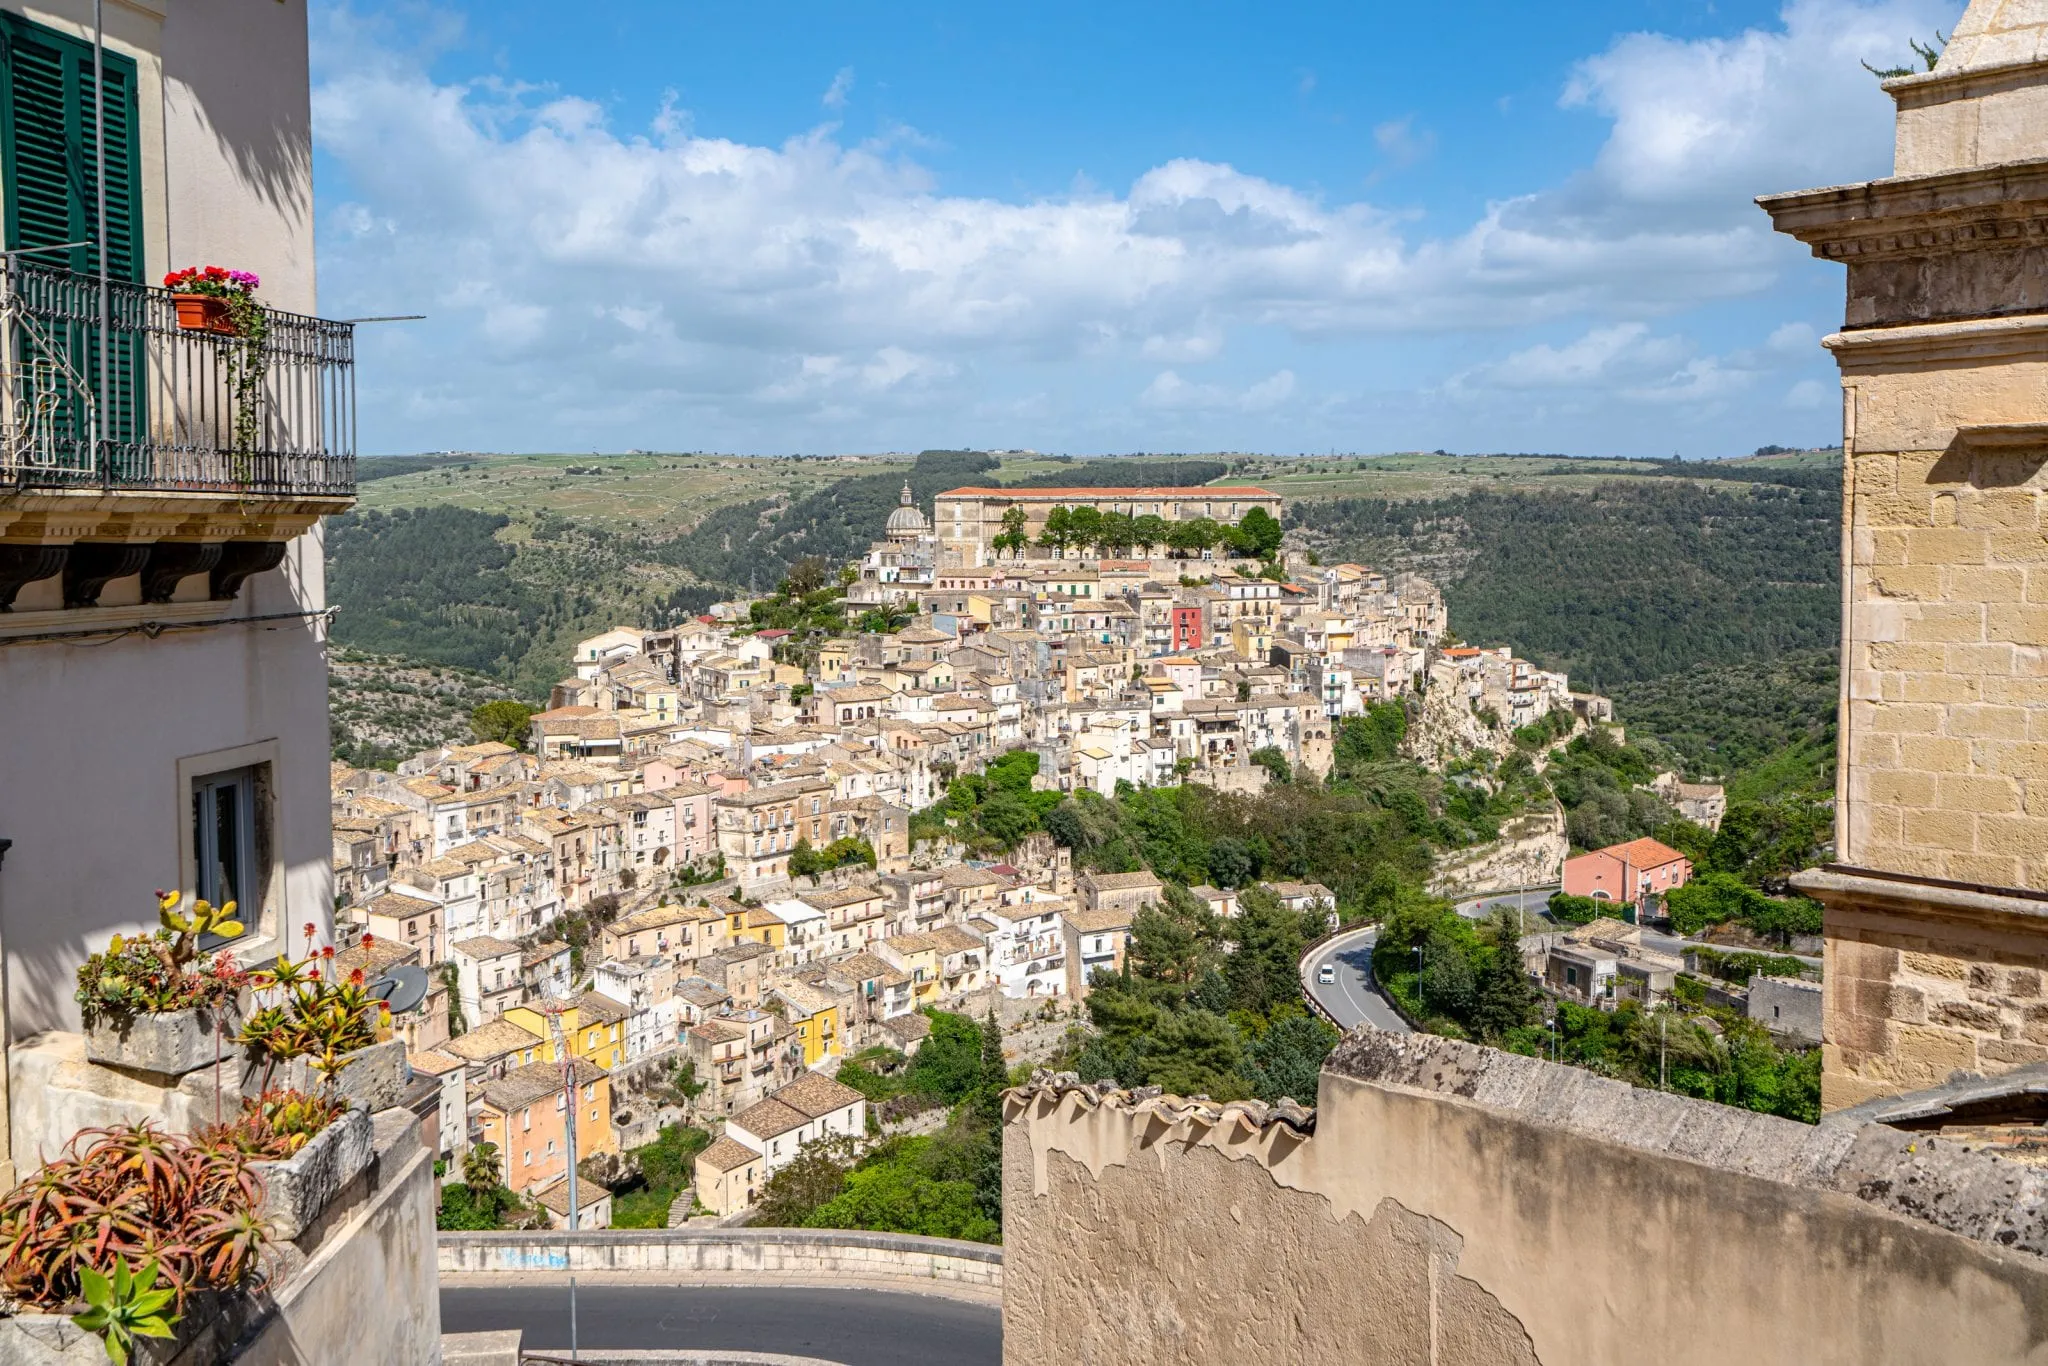 Ragusa Ilba as seen from above in the Val di Noto, a must-see place during ...